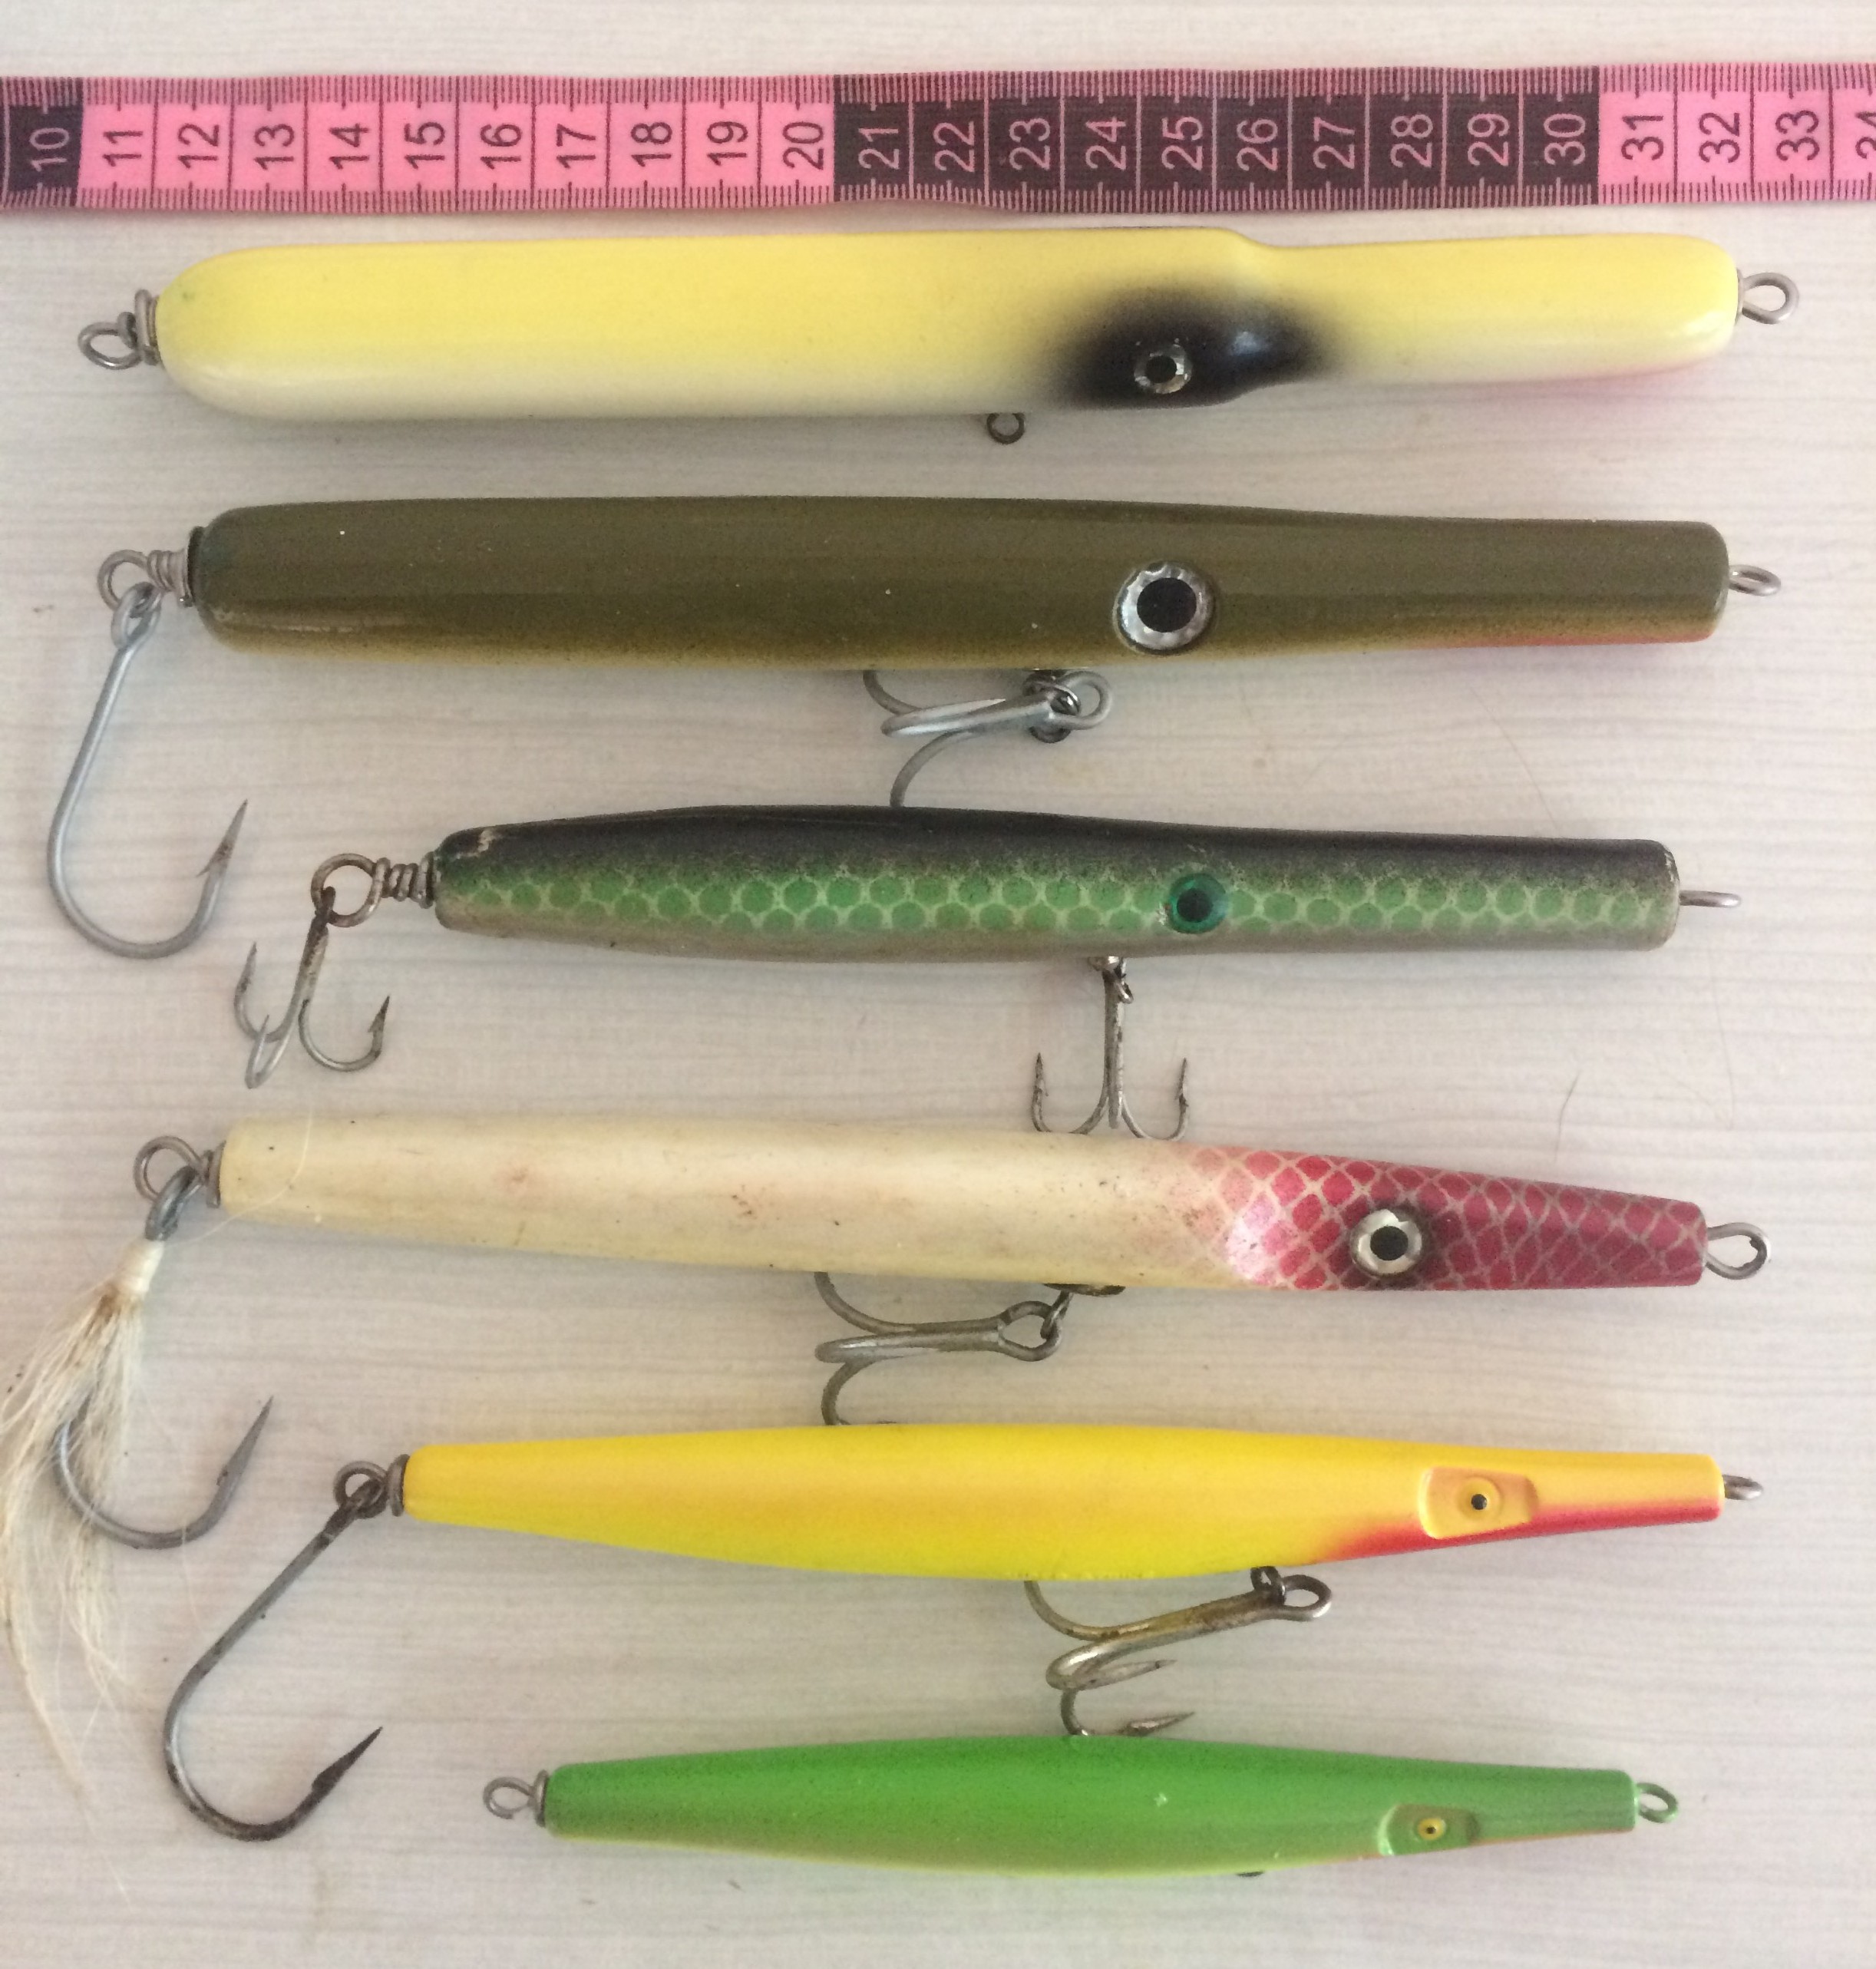 A load more needlefish information - Guest blog post by Keith